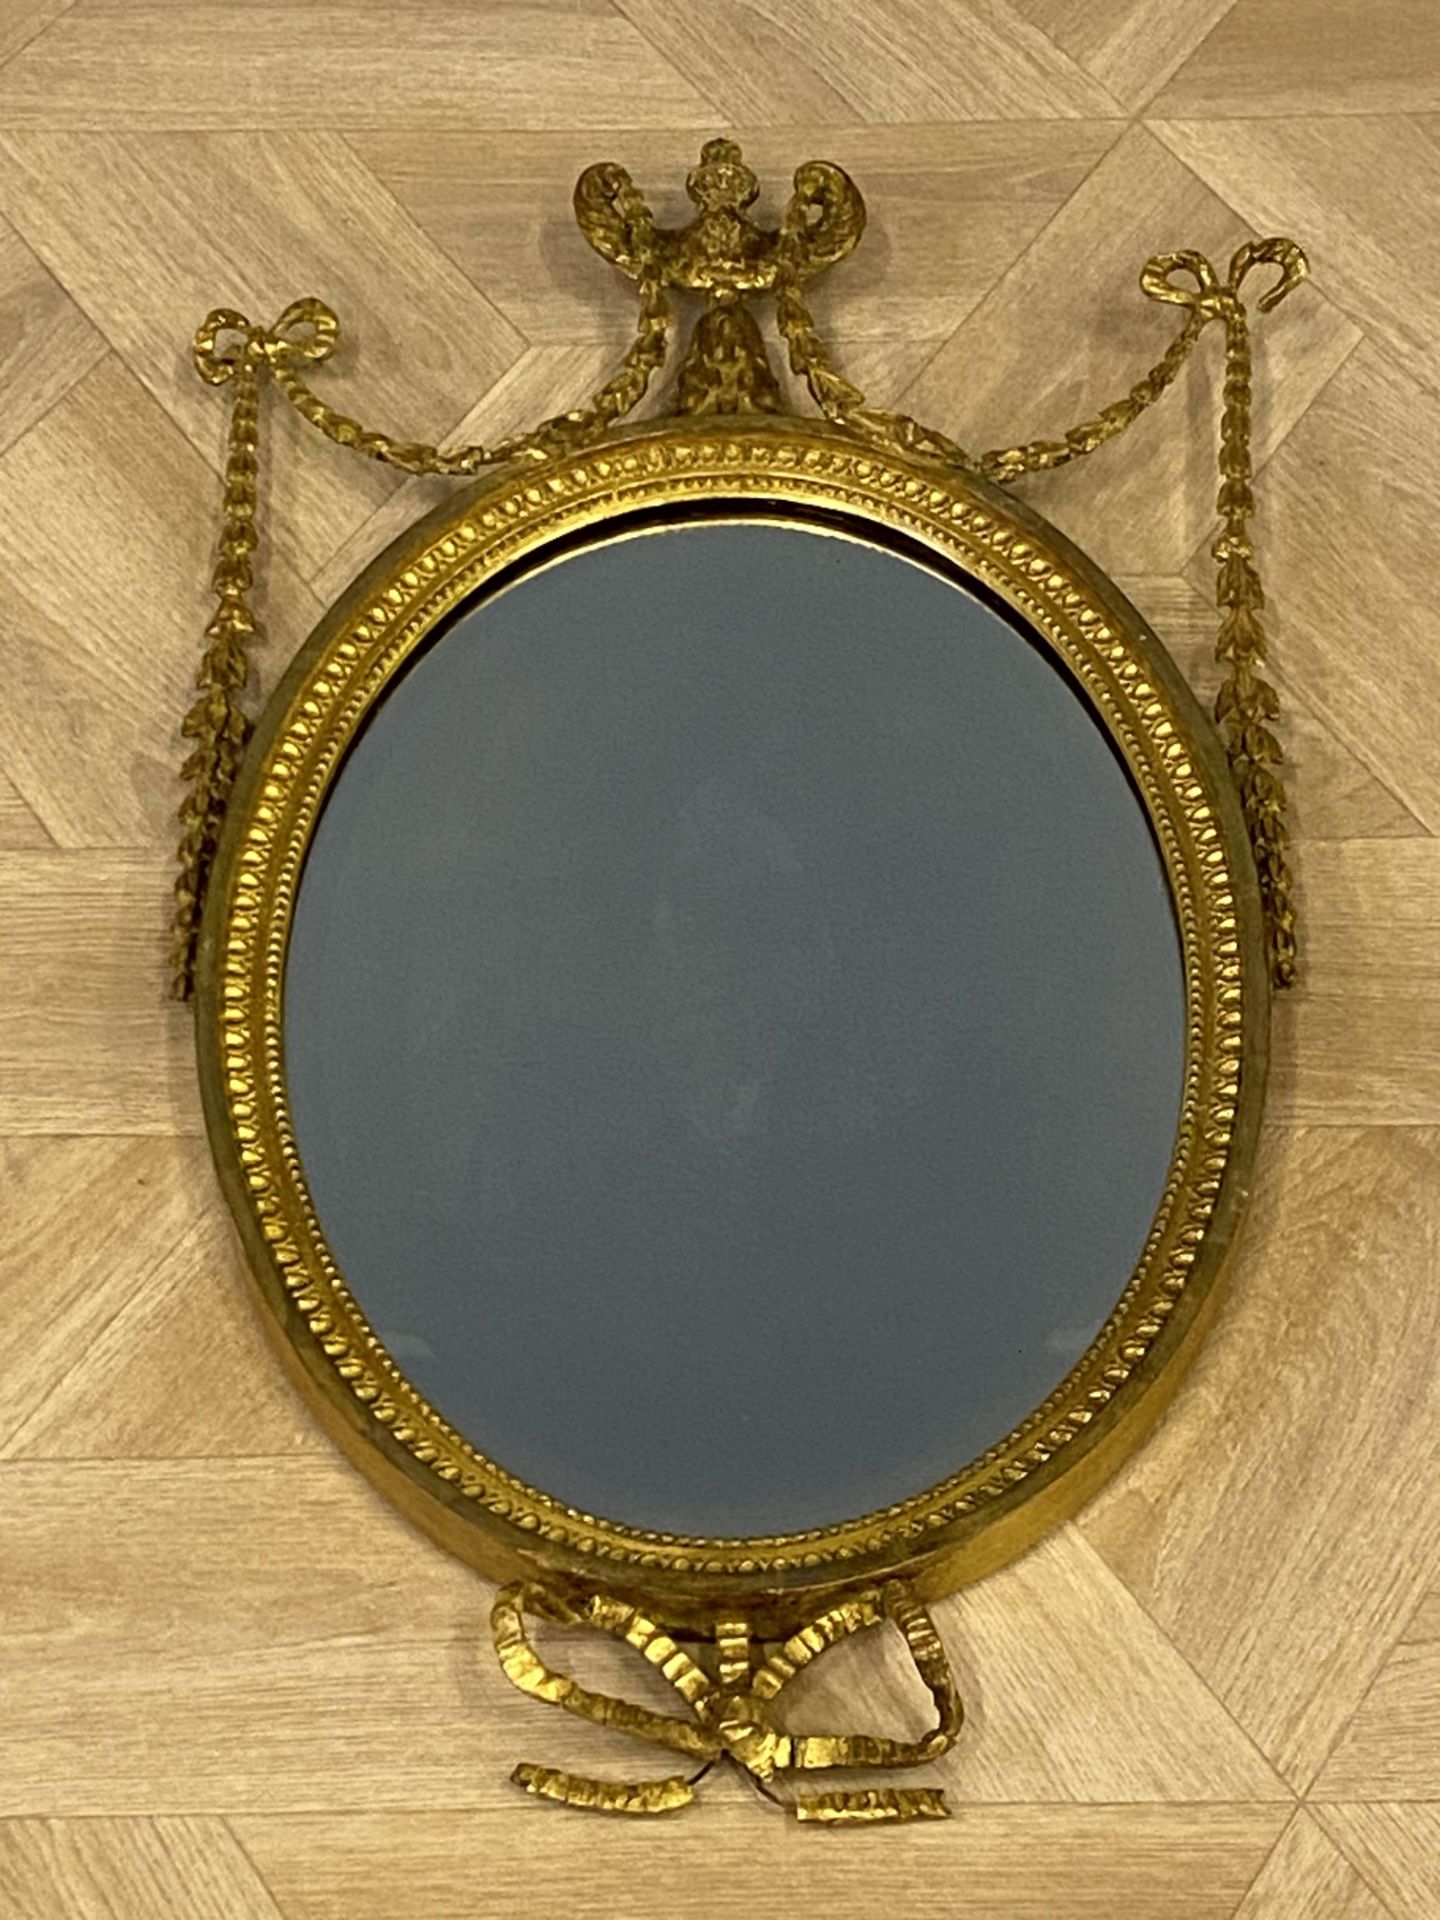 Antique oval Adam style mirror - Image 2 of 5